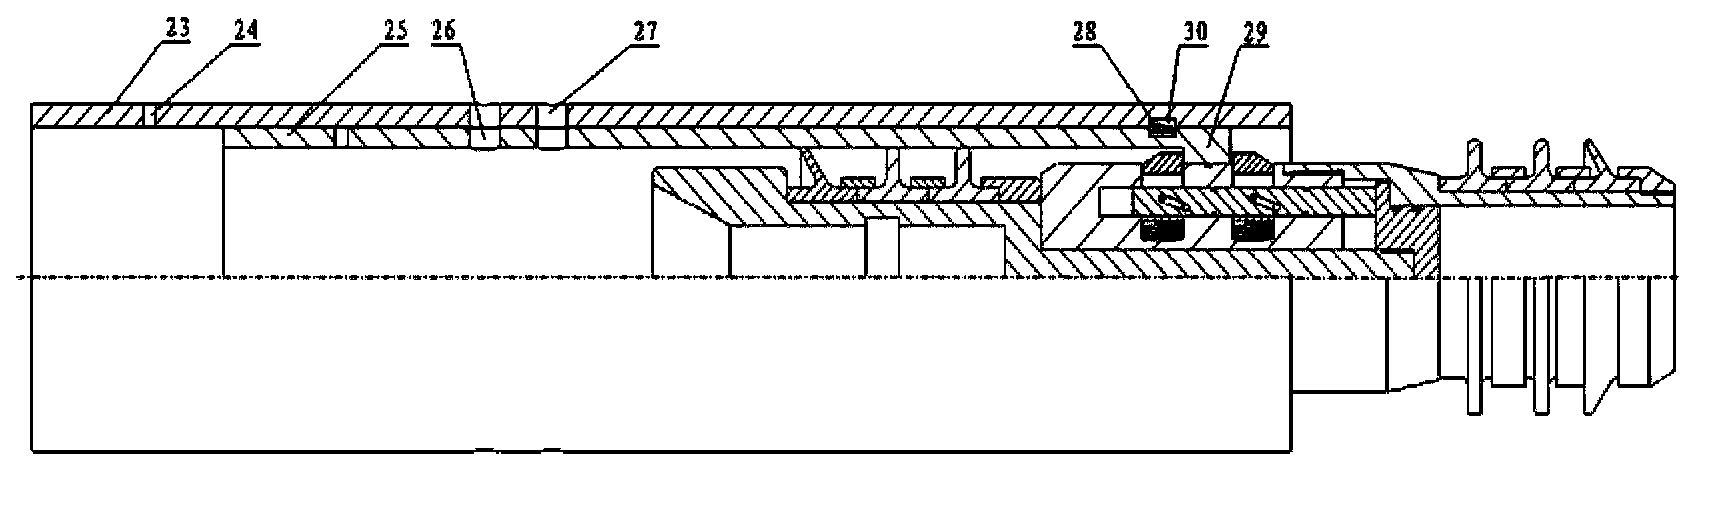 Sliding sleeve opening and closing device